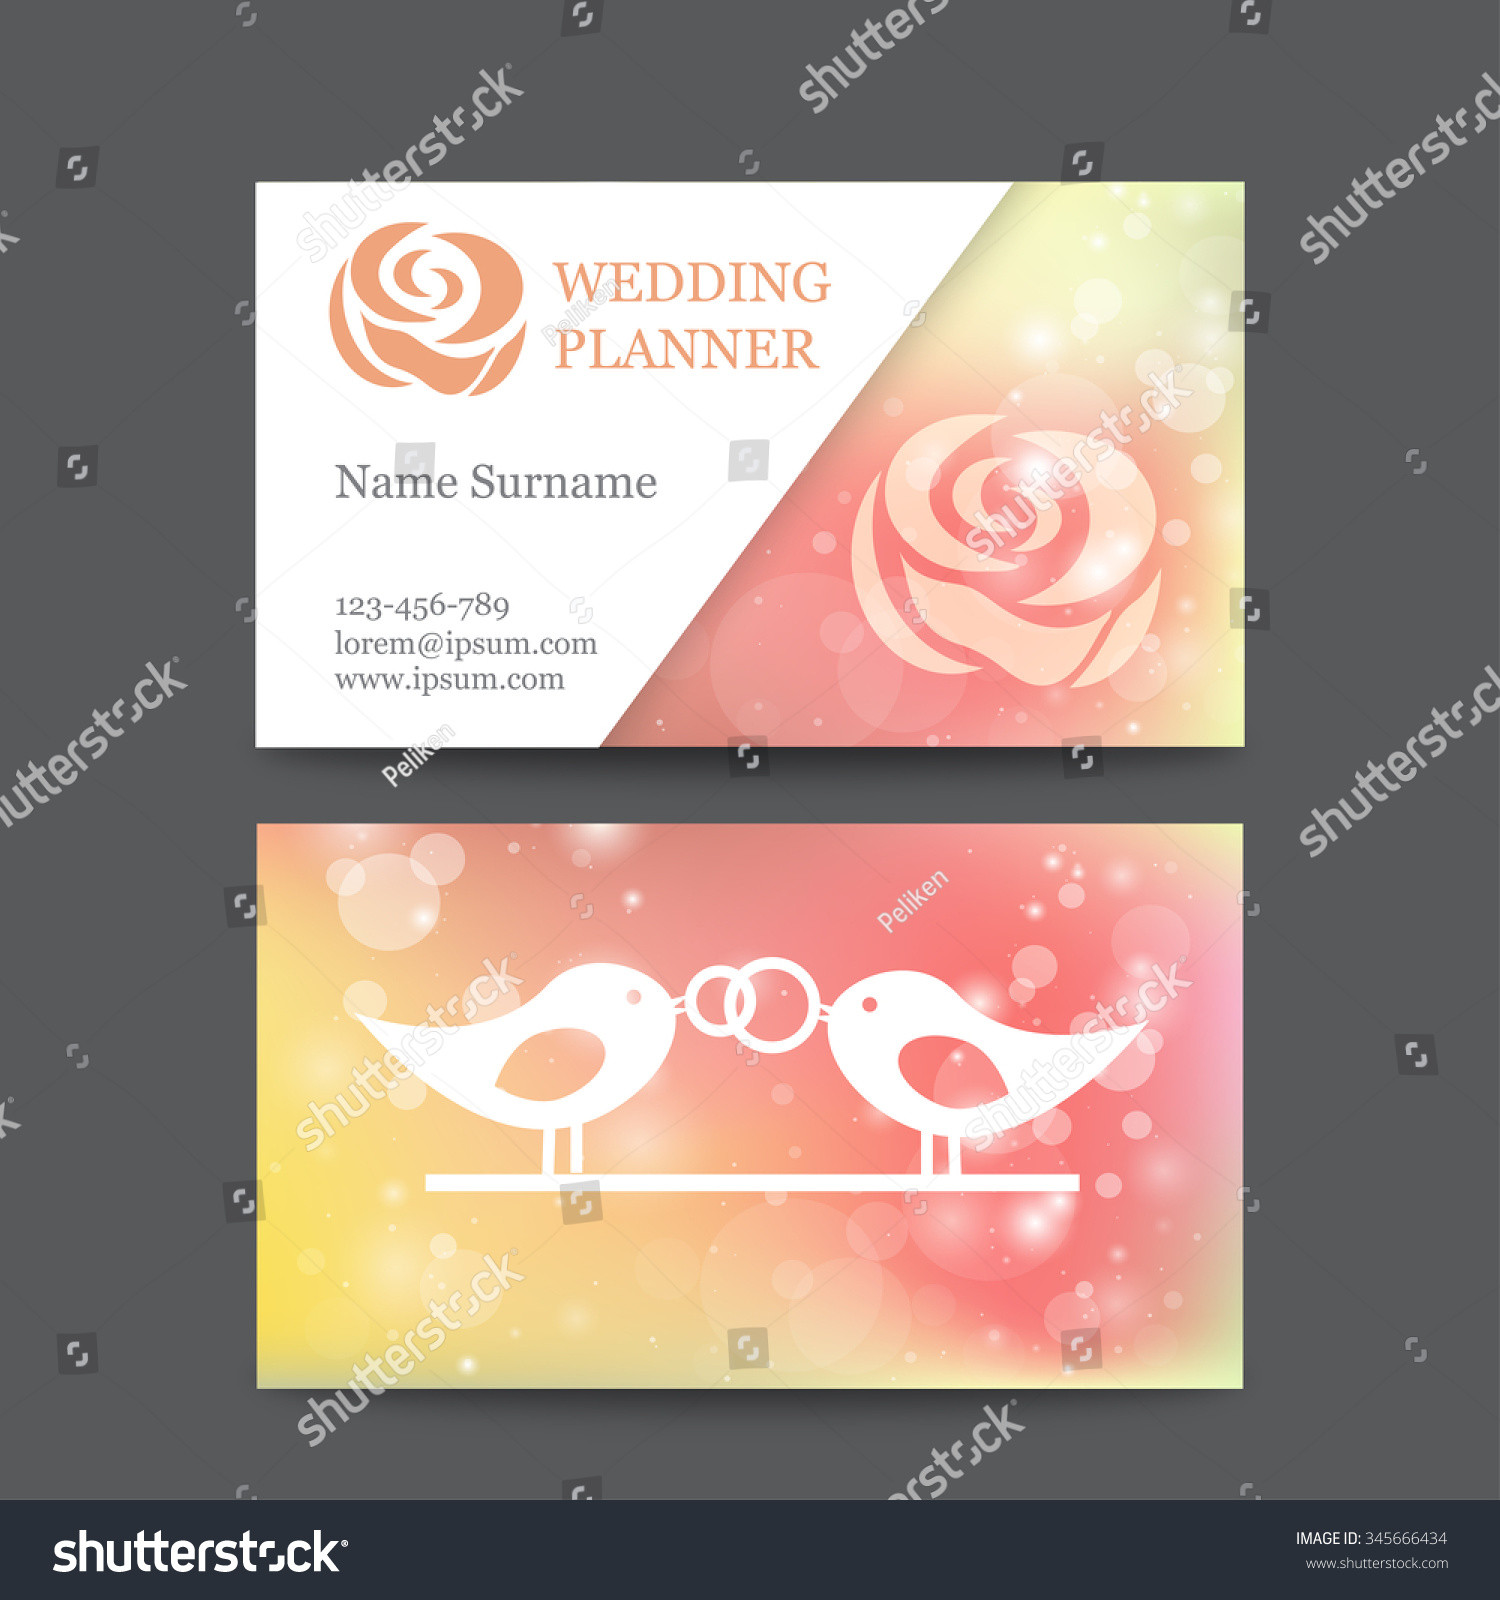 Wedding Planner Visiting Card Sample Of Zazzle Business Card Template